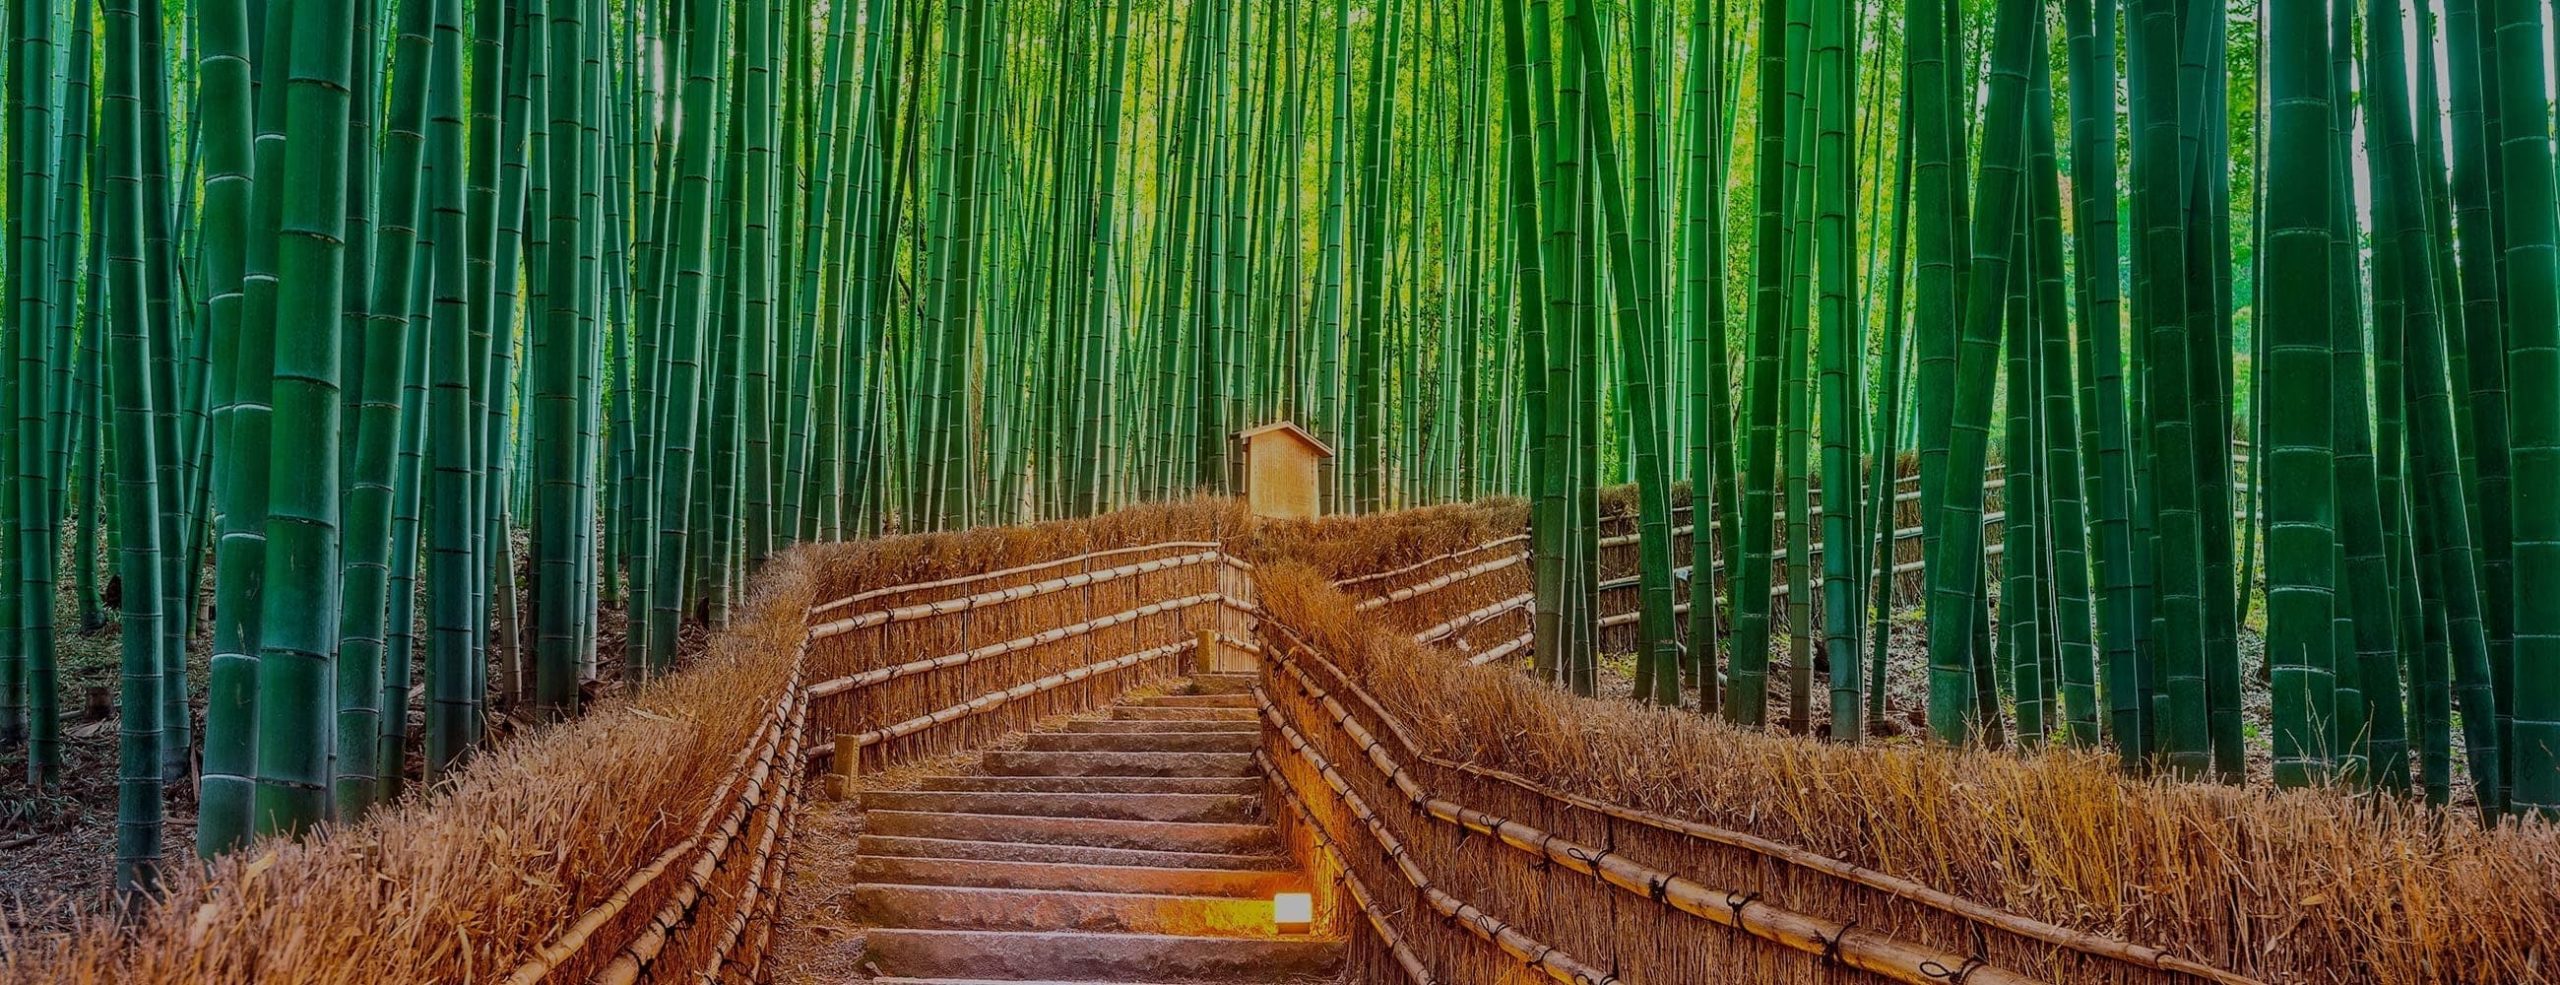 bamboo forest with walkway